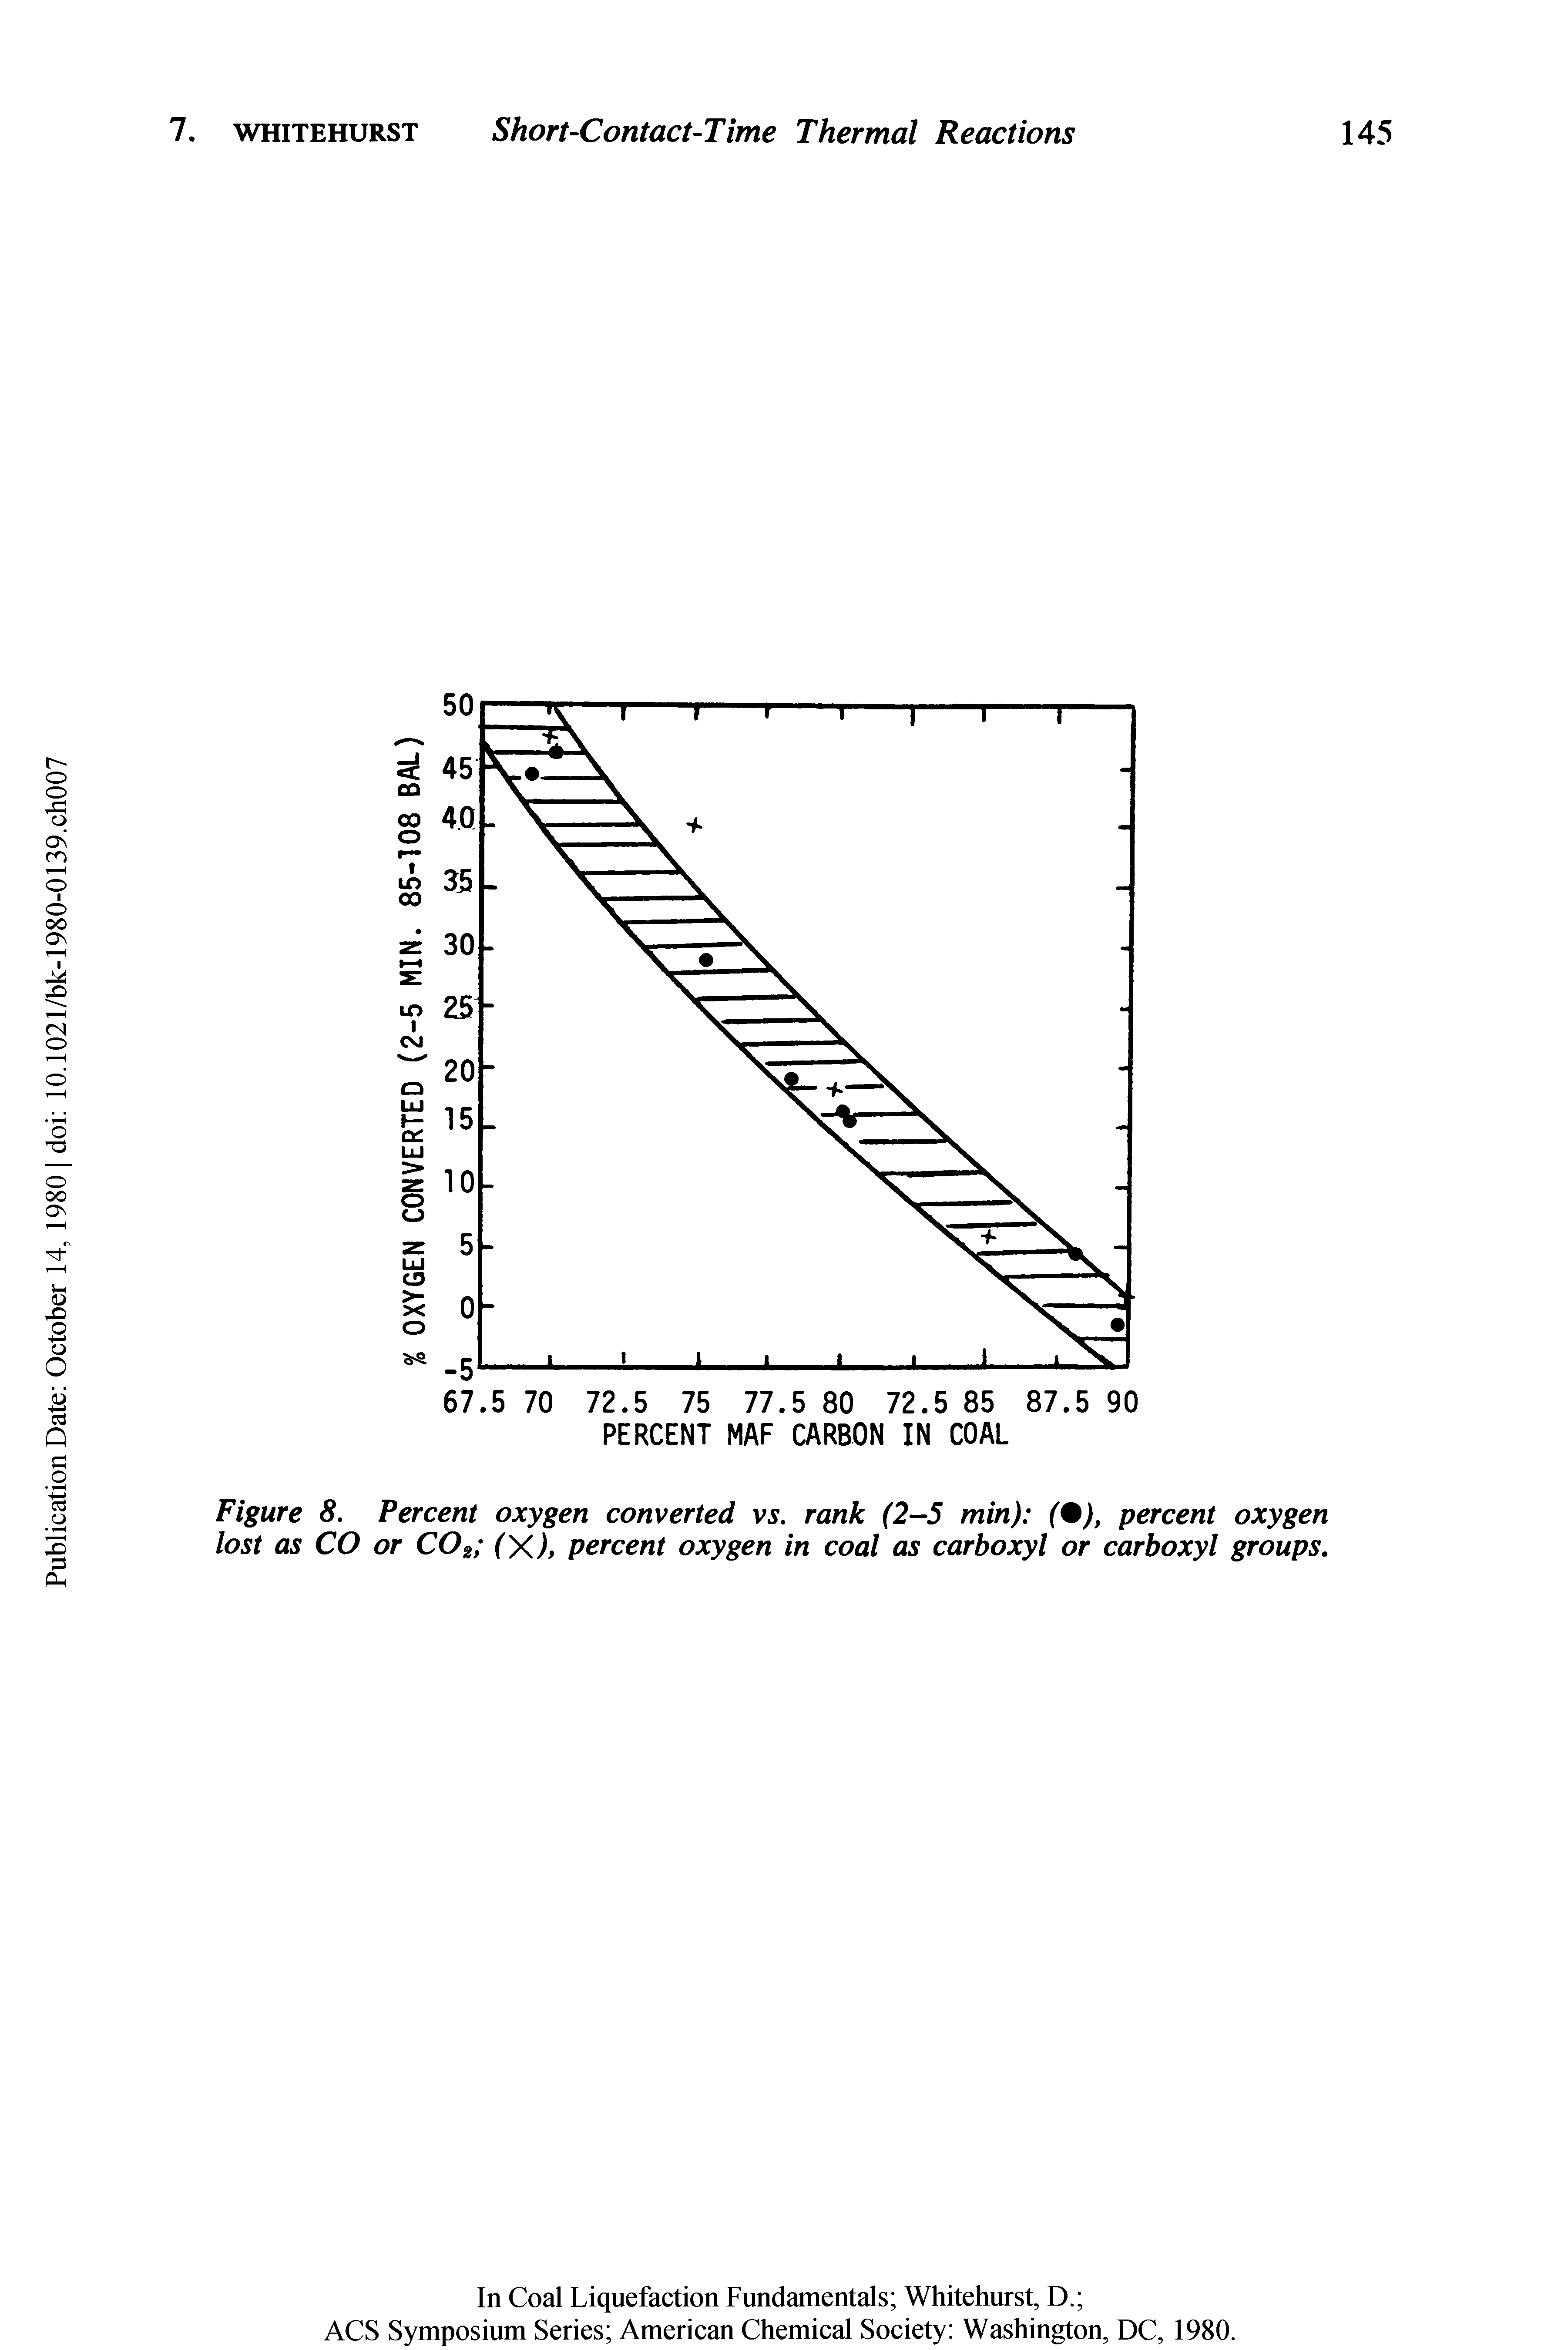 Figure 8. Percent oxygen converted vs. rank (2-5 min) (%), percent oxygen lost as CO or C02 (X), percent oxygen in coal as carboxyl or carboxyl groups.